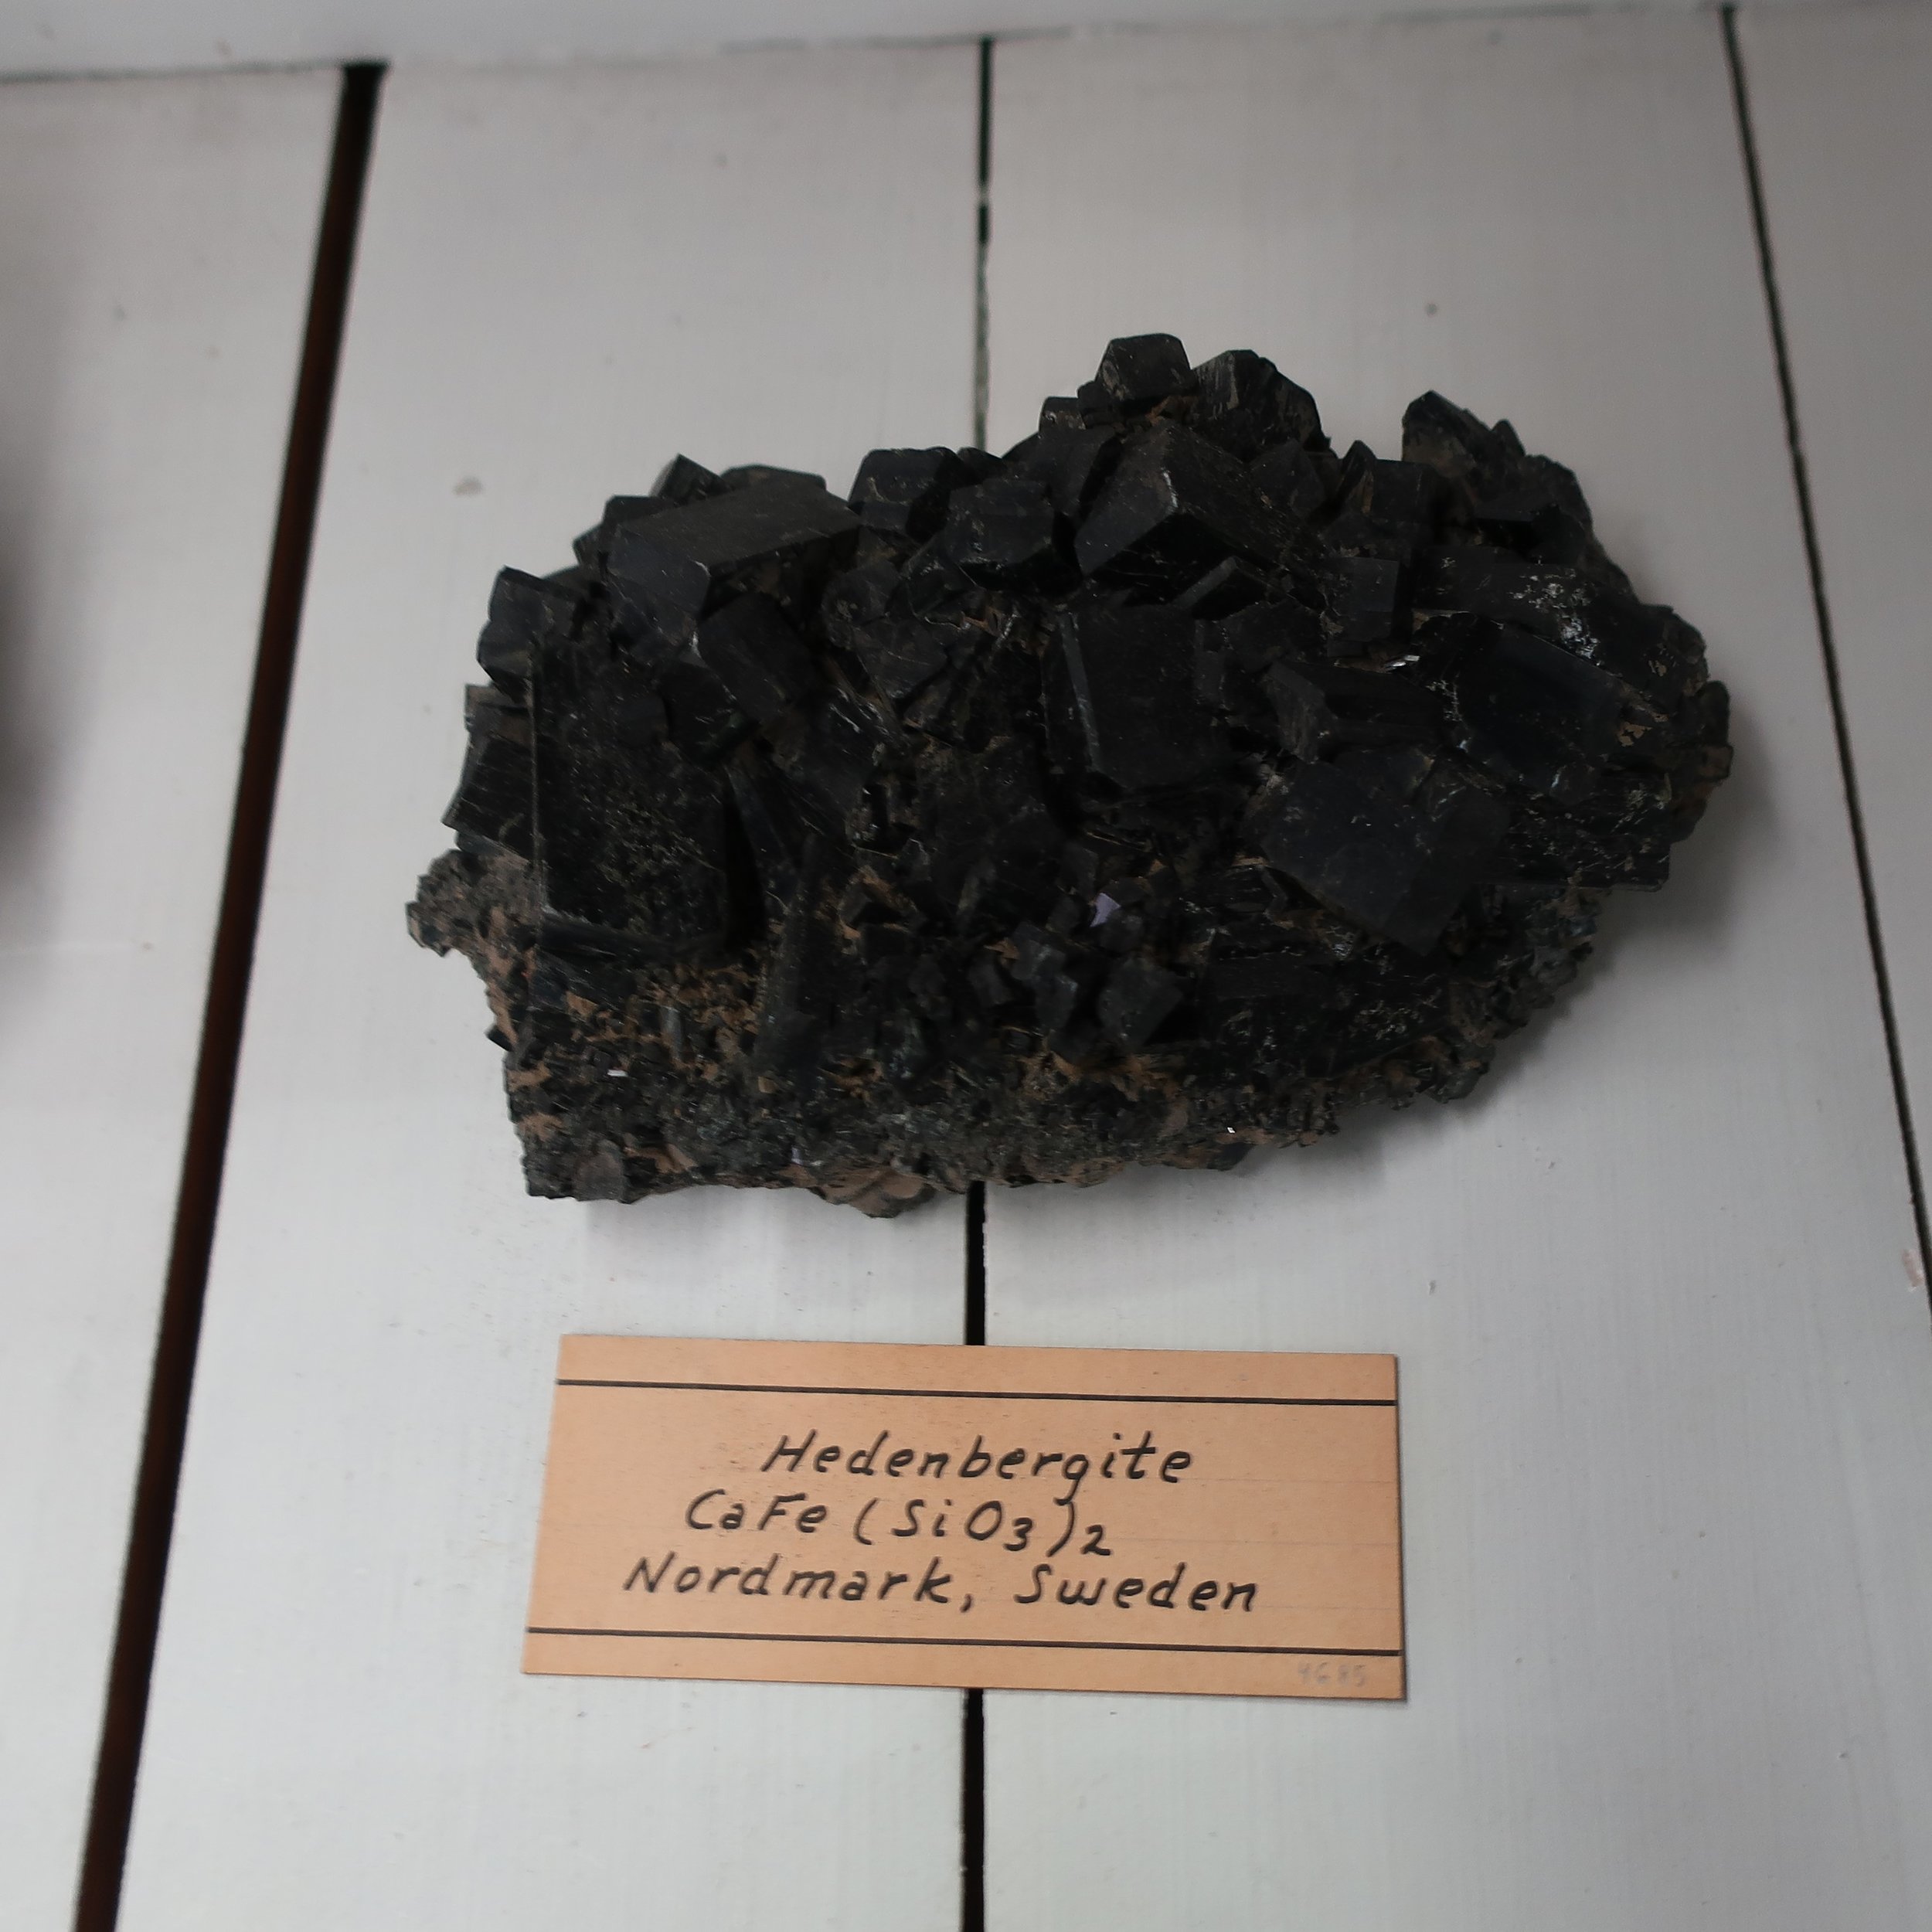   “Hedenbergite  is a variety of cocolite from Zuneburg in Sweeden, its chemical contents vary but little from the former species. it is named in honor of the Chemist Hedenburg, the French Mineralogist Beudant places several varieties under that name